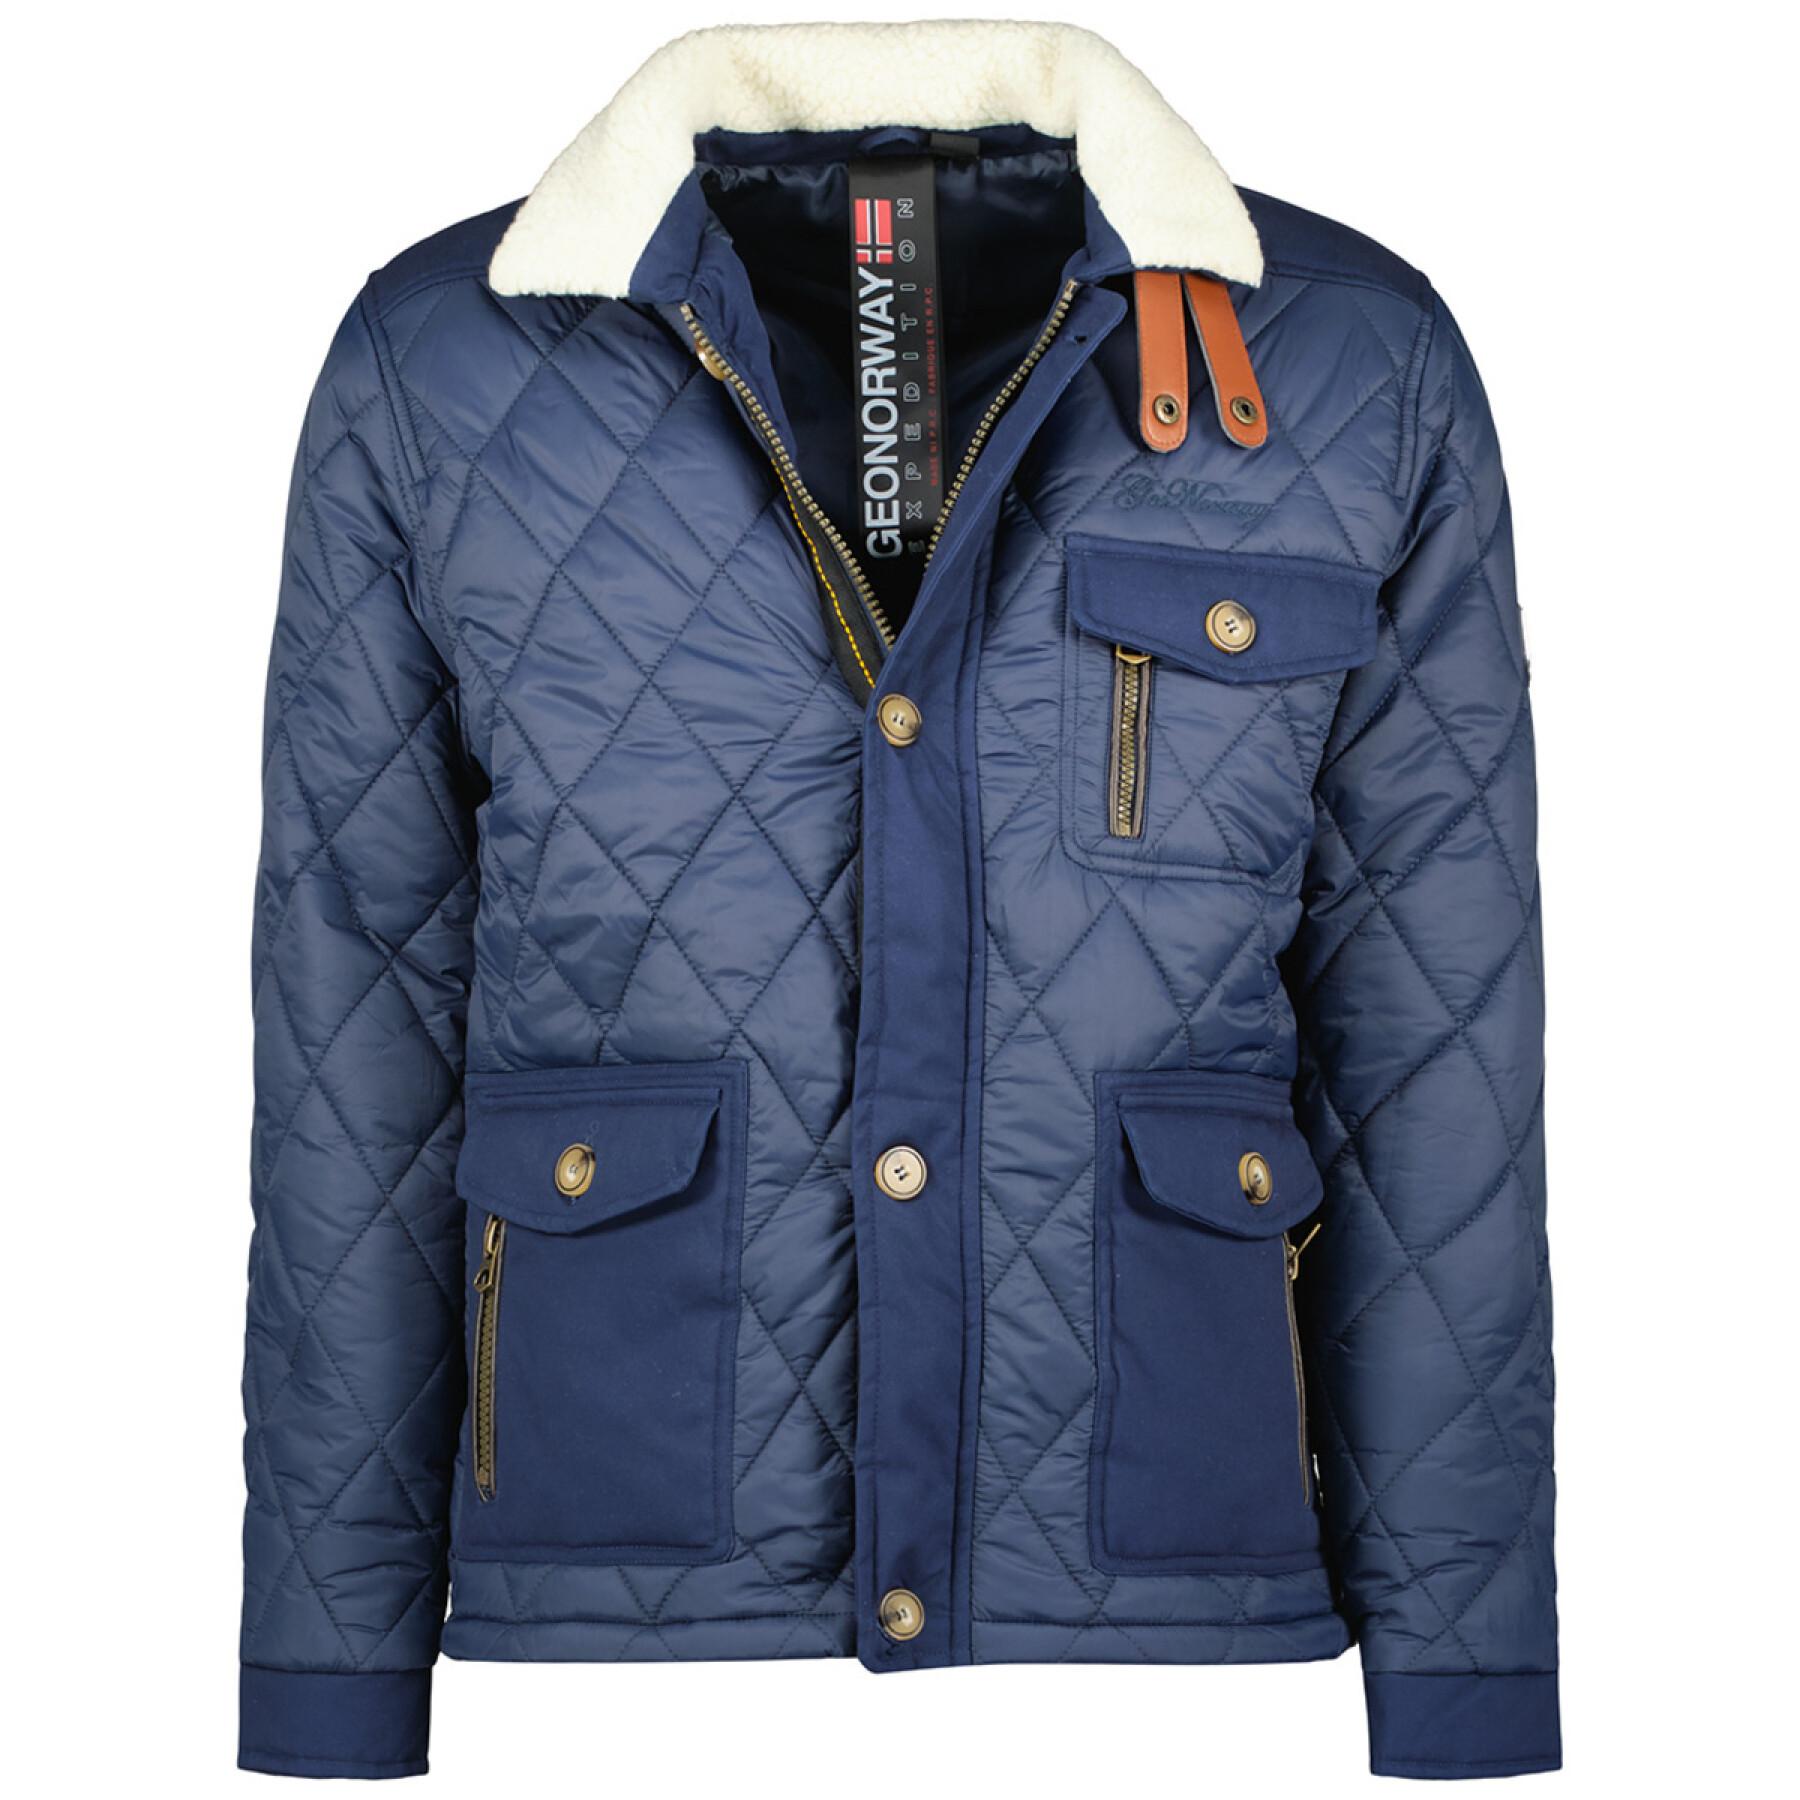 Jacka Geographical Norway Dalkov Db Eo